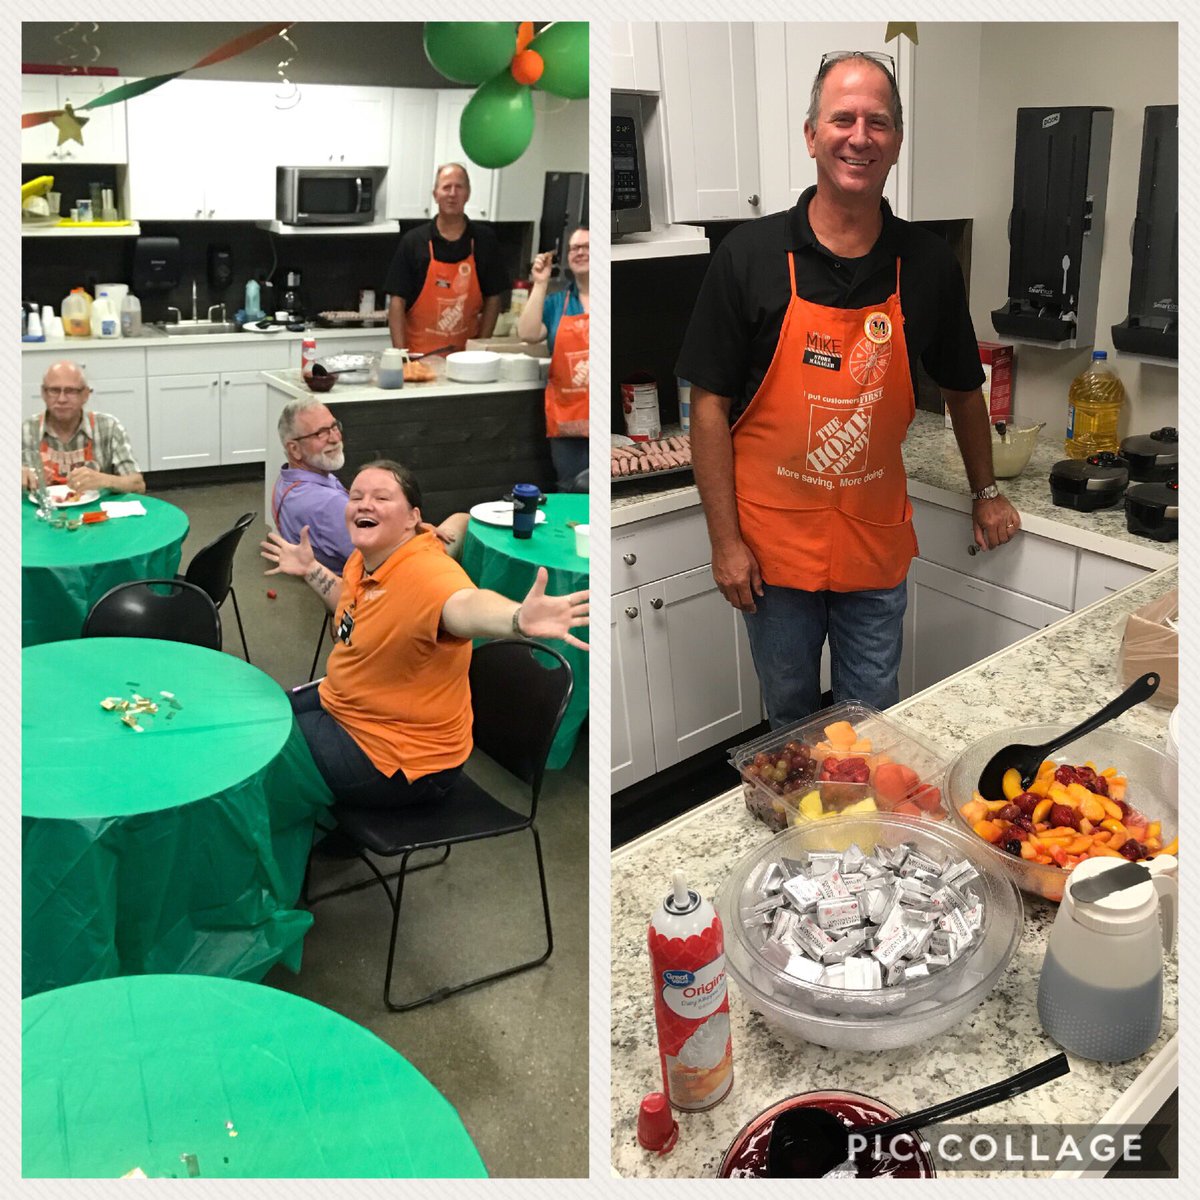 2761 doin success sharing right! Pancakes, waffles and sausage! #ssd275 @troyer_paige @bobsaniga @Dave_Dawber @TrudellM @HouleHeather